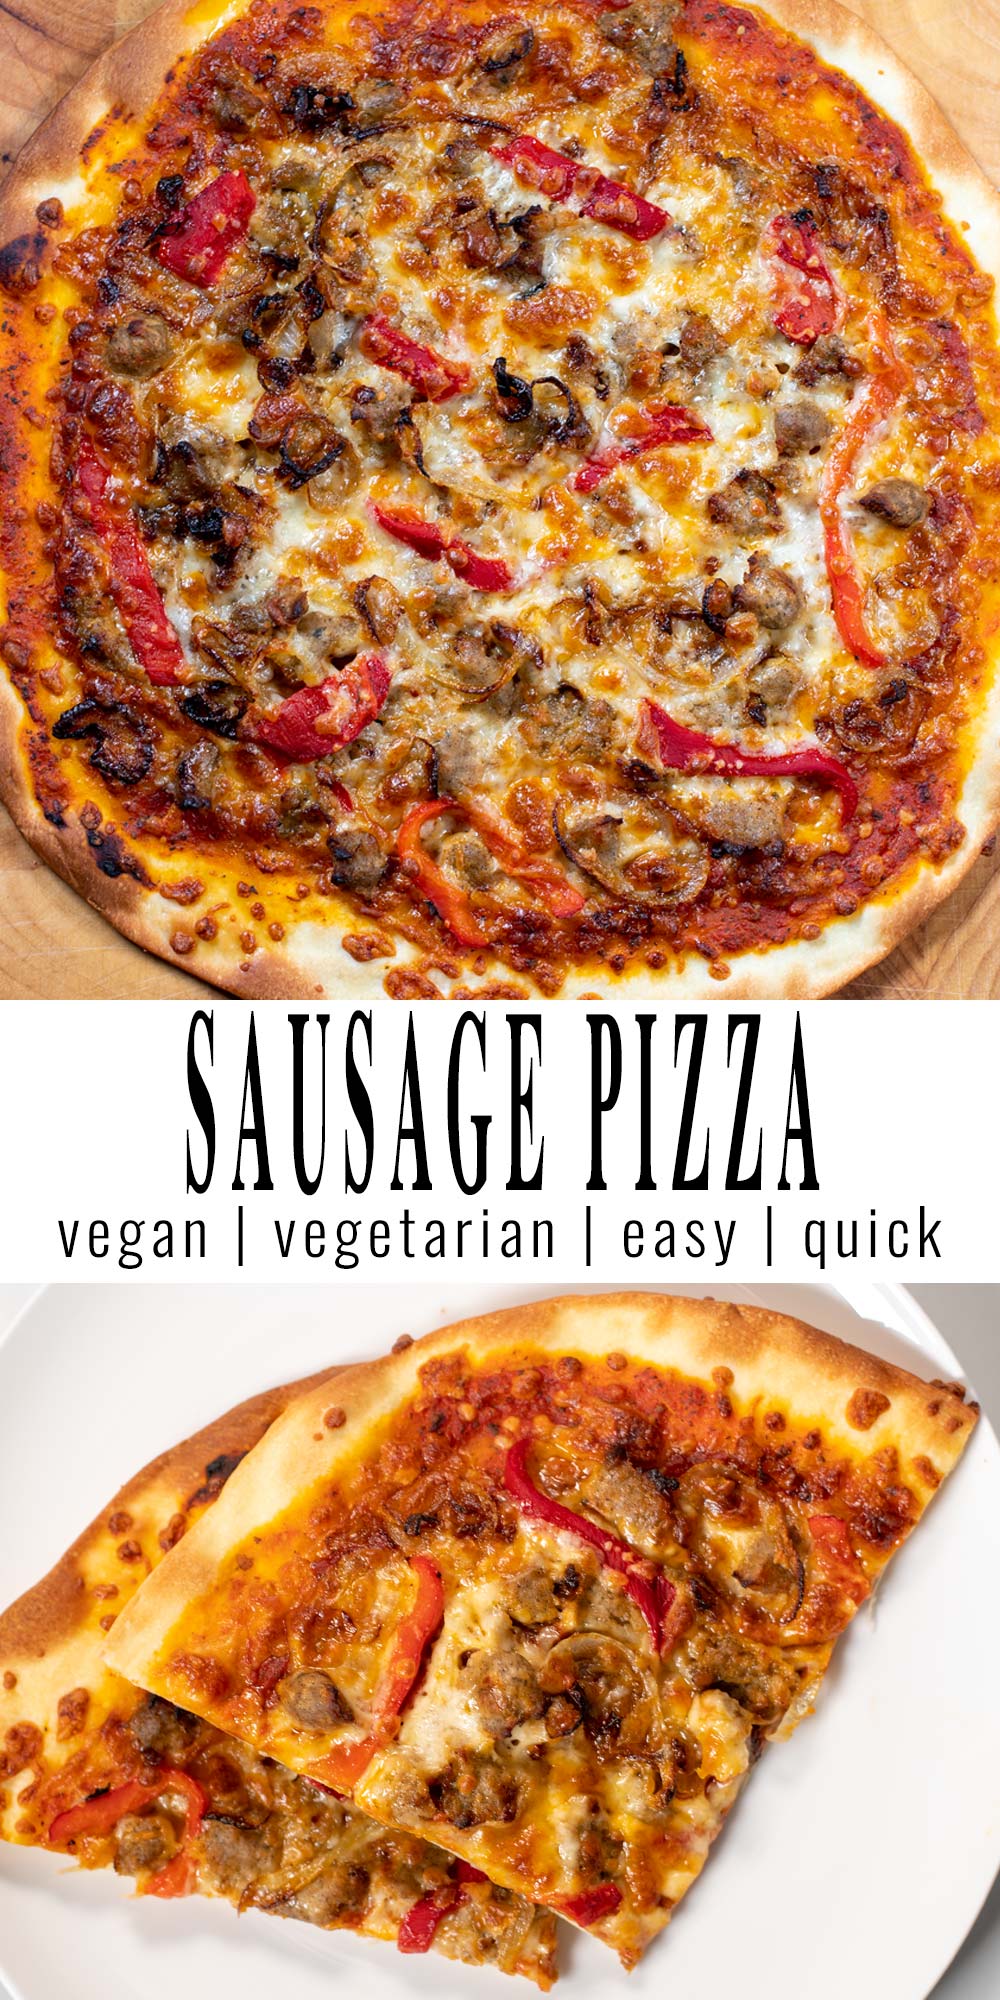 Collage of two photos of Sausage Pizza with recipe title text.